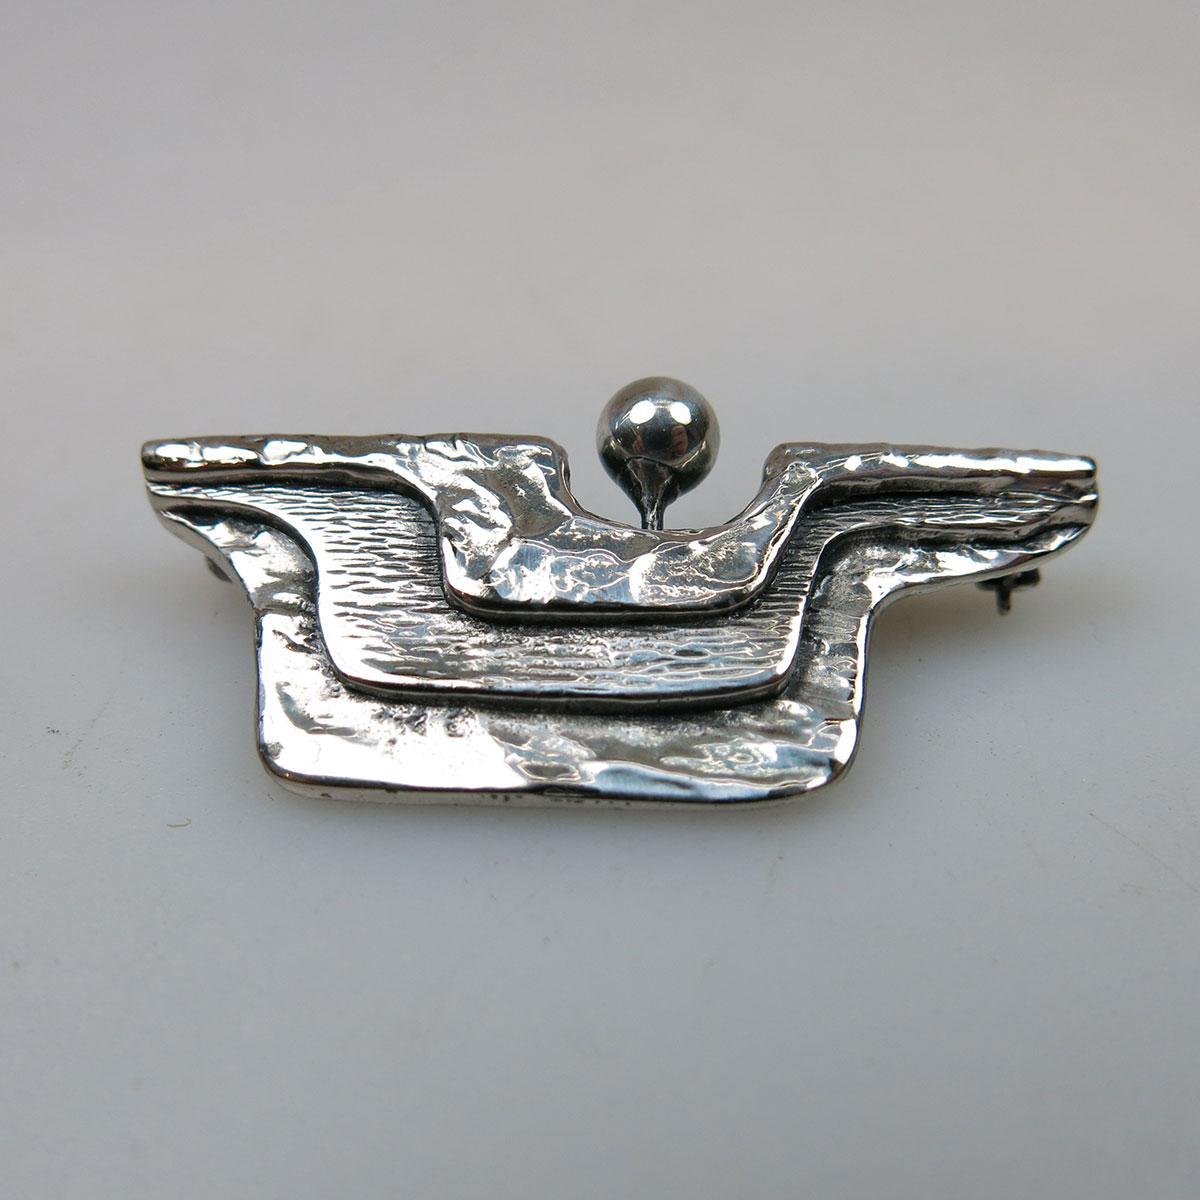 Jean-Claude Darveau Silver-Plated Abstract Brooch